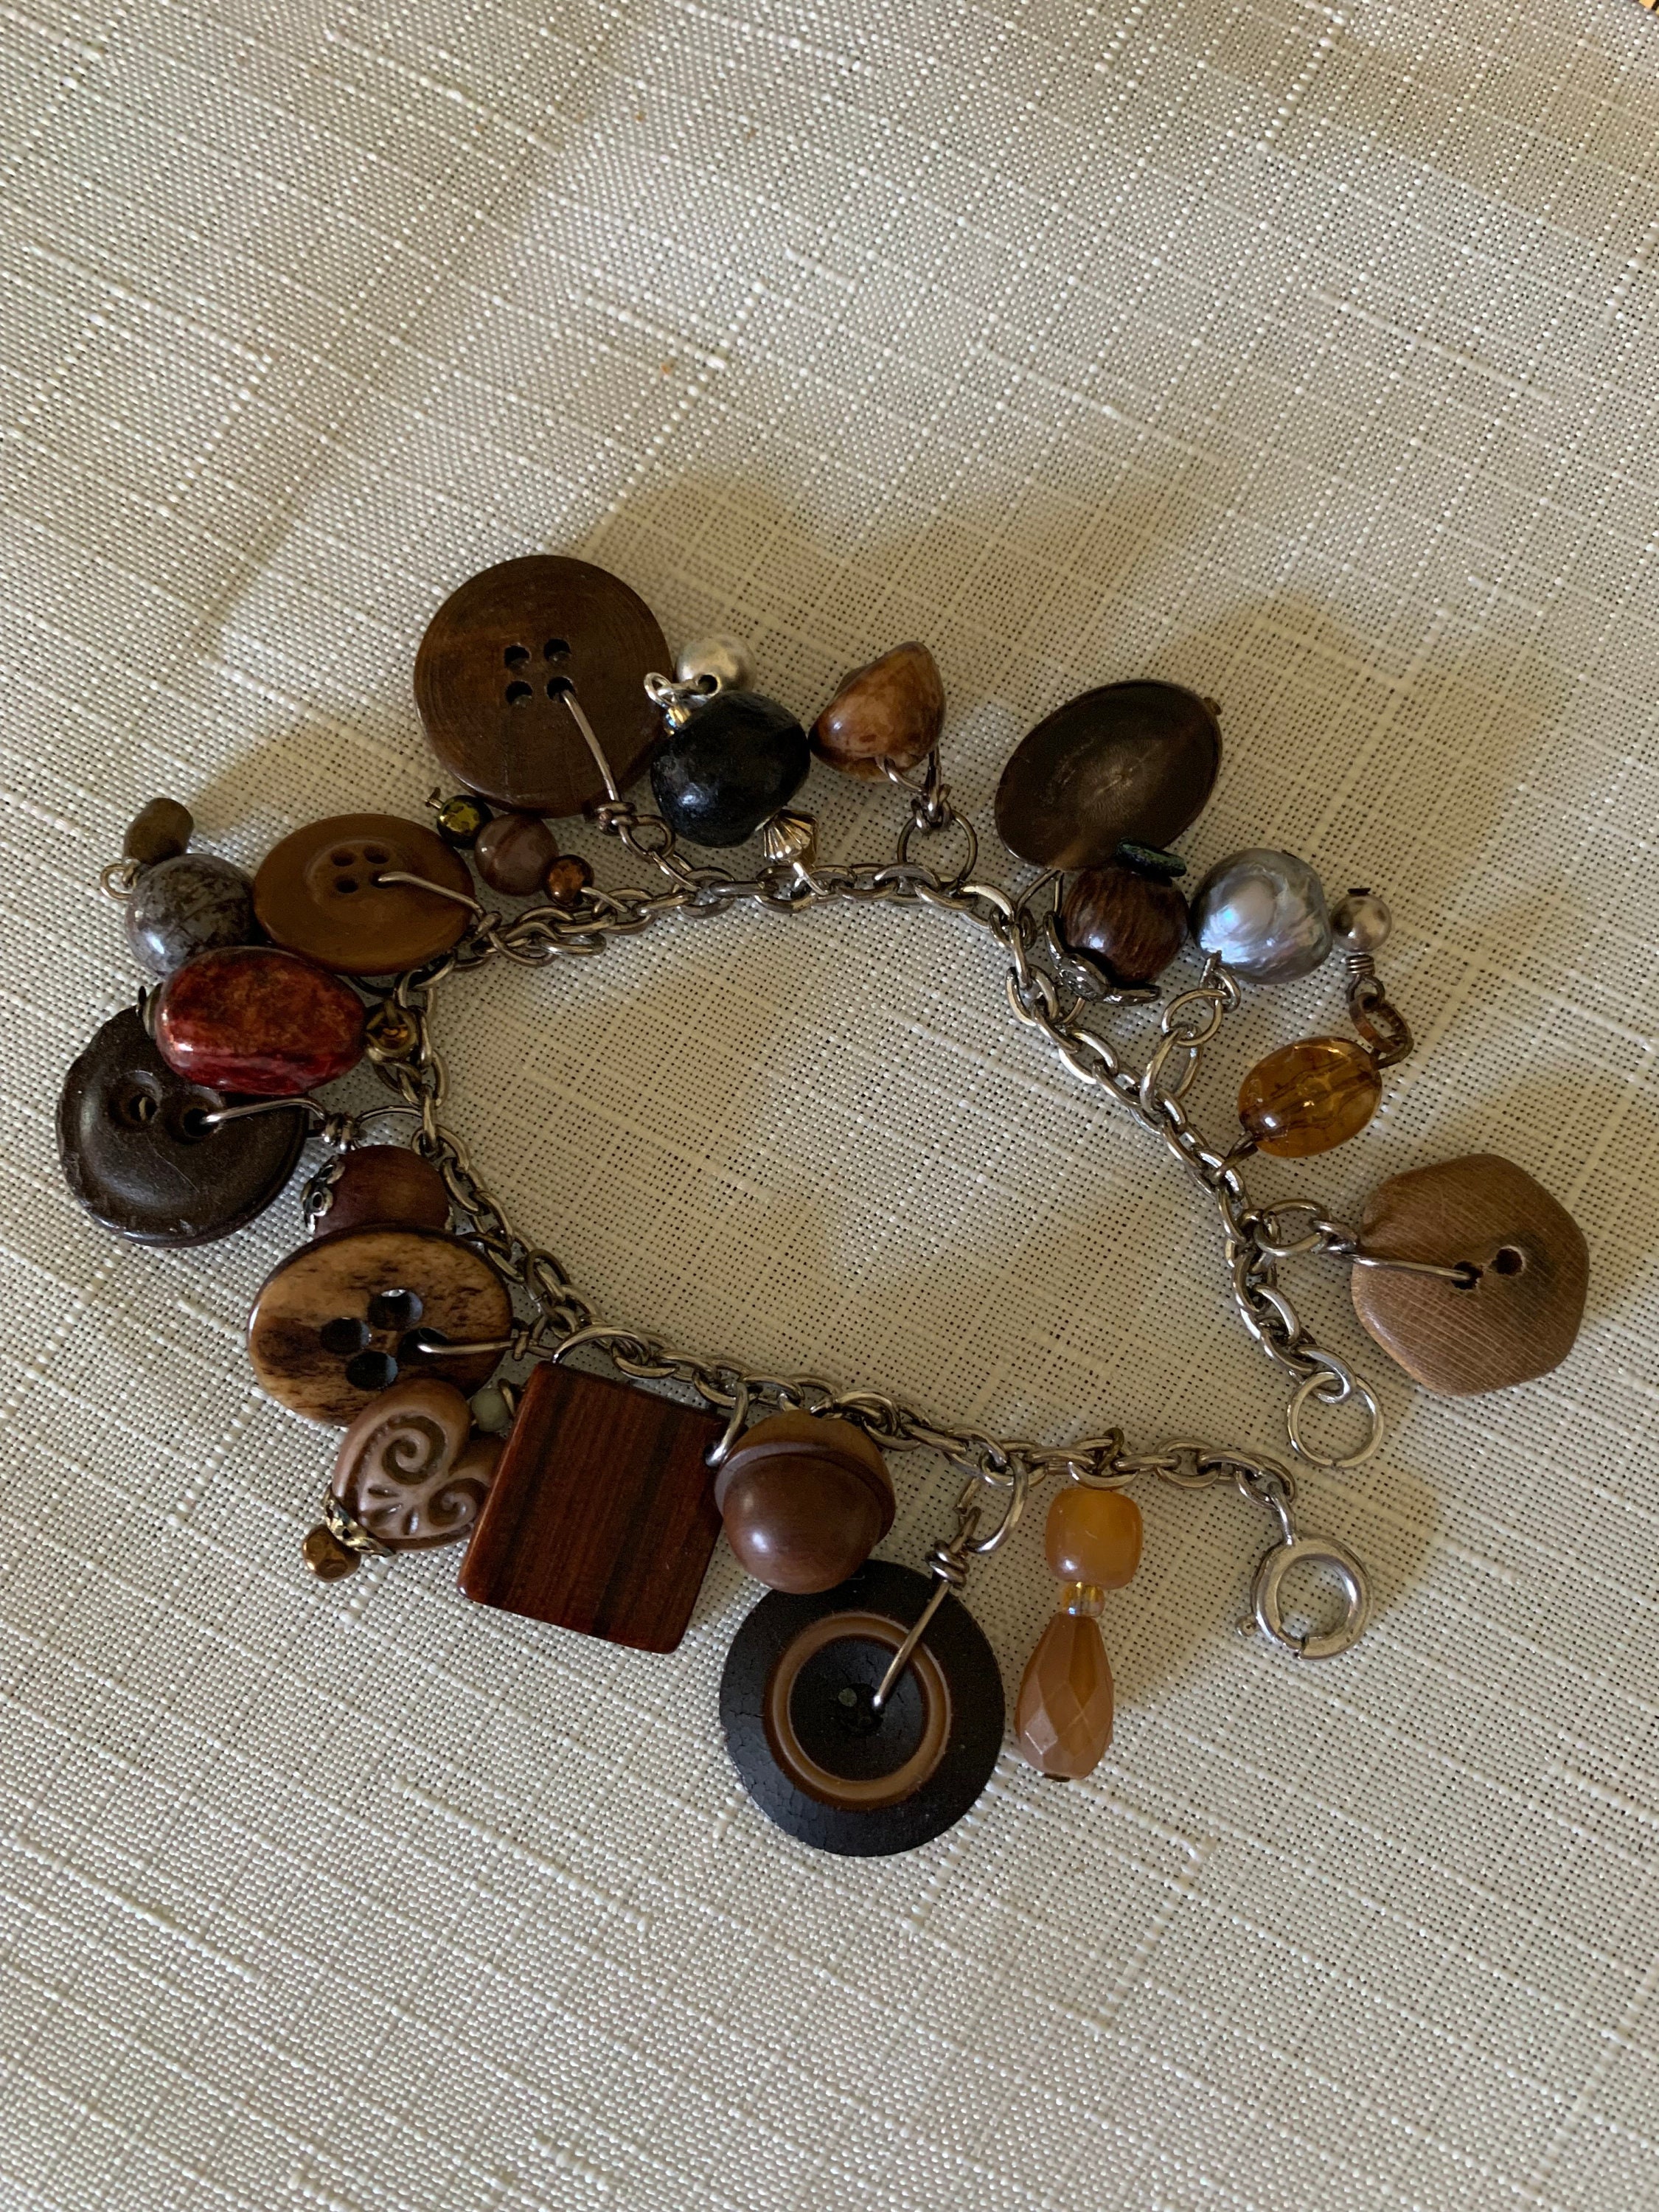 Up-cycled Louis Vuitton Padlock Bracelet  Girly jewelry, Upcycled jewelry,  Cute jewelry